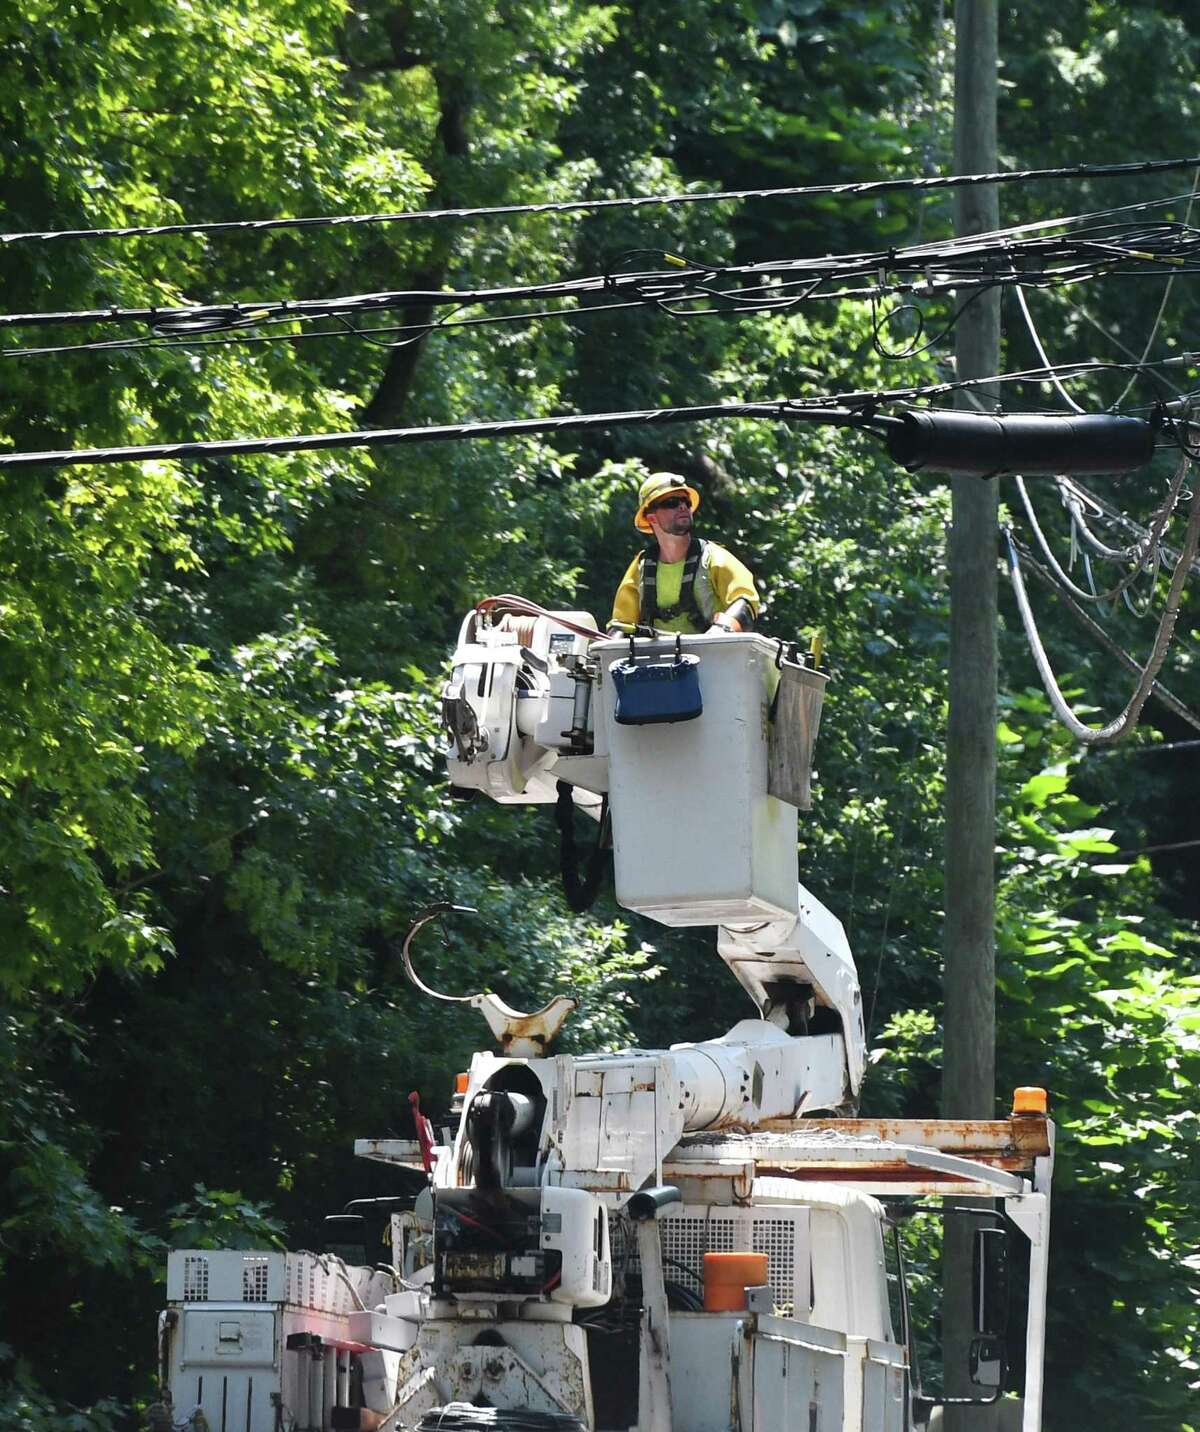 Crews repair powerlines Doubling Road six days after Tropical Storm Isaias hit Greenwich, Conn. Monday, Aug. 10, 2020. Many Eversource customers still remain without power as crews continue scrambling to repair downed powerlines and clean up fallen trees.